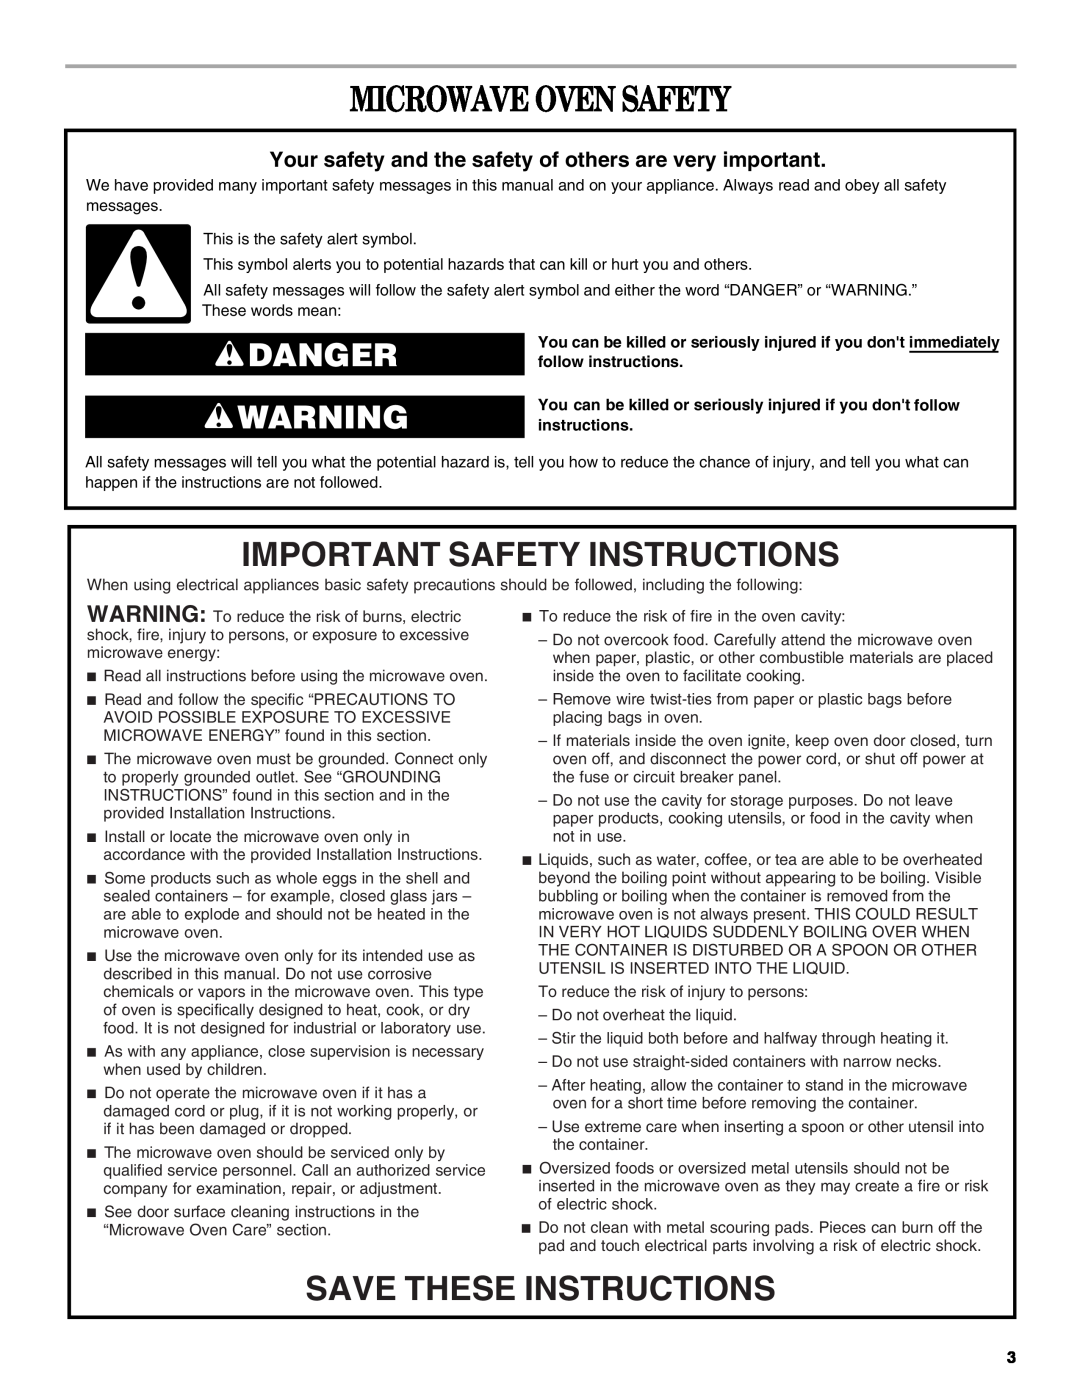 Amana AMC7159TA manual Microwave Oven Safety, Important Safety Instructions, Save These Instructions, Danger 